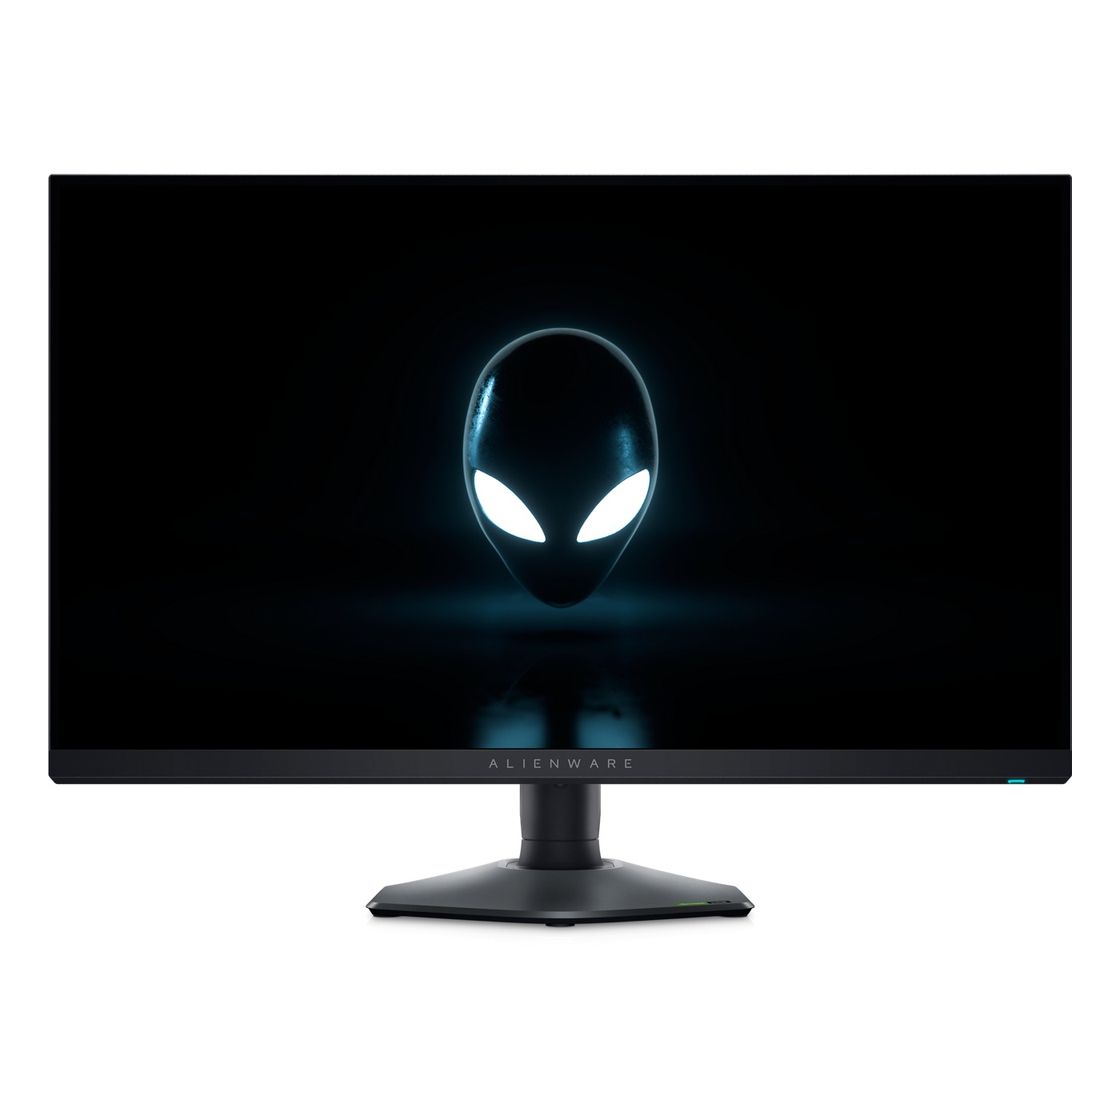 Alienware 27 Gaming Monitor - AW2724DM - 27-inch QHD (2560x1440)/180Hz/1ms - Dark Side of the Moon